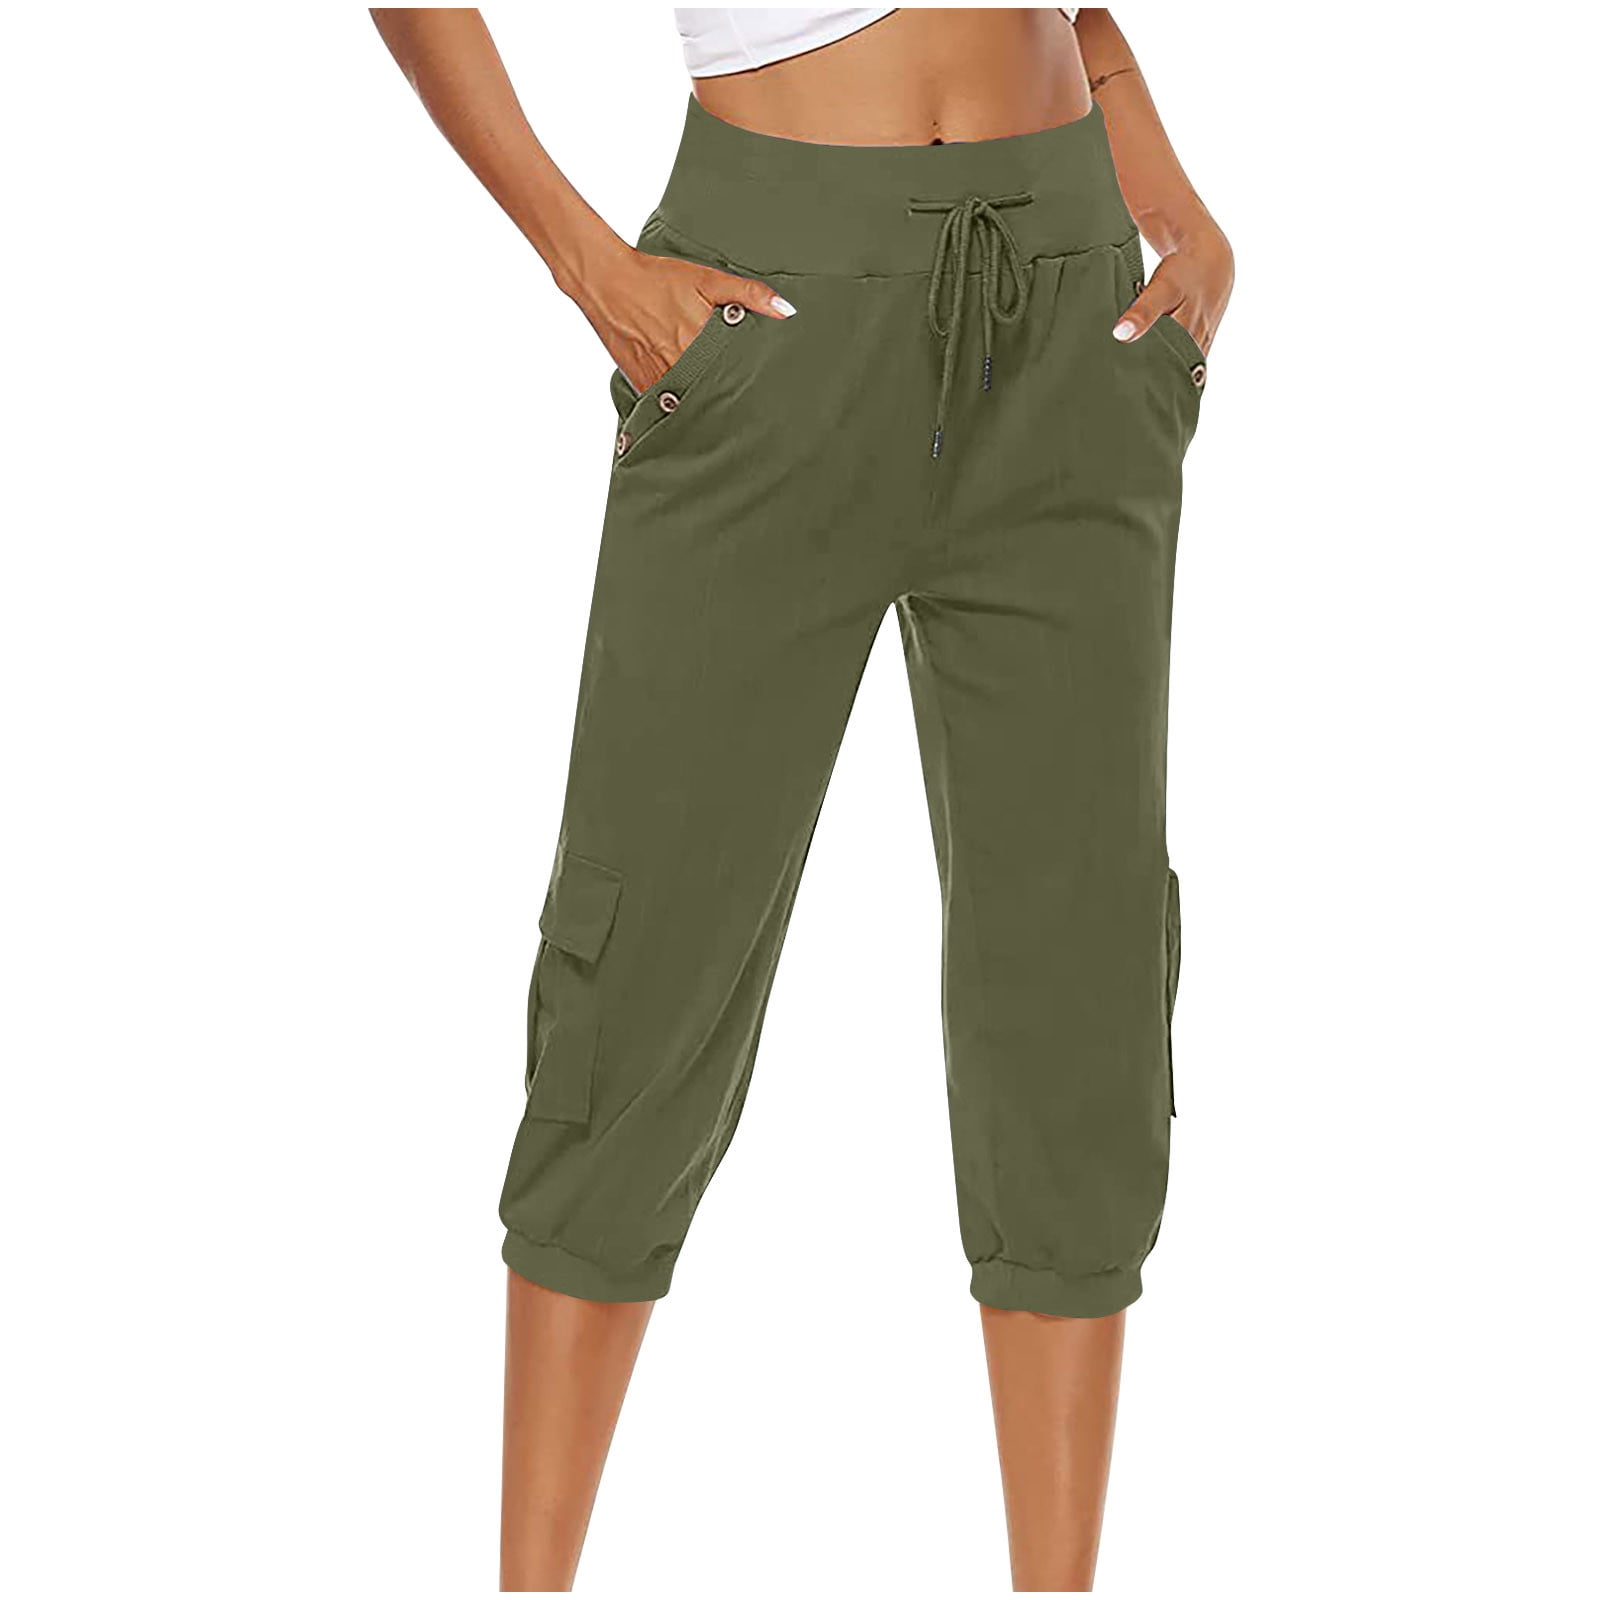 Straight Leg Lounge Capri Pants for Women Summer Stretch Cotton Linen  Cropped Trousers Plus Size Capris with Pockets Army Green at  Women's  Clothing store